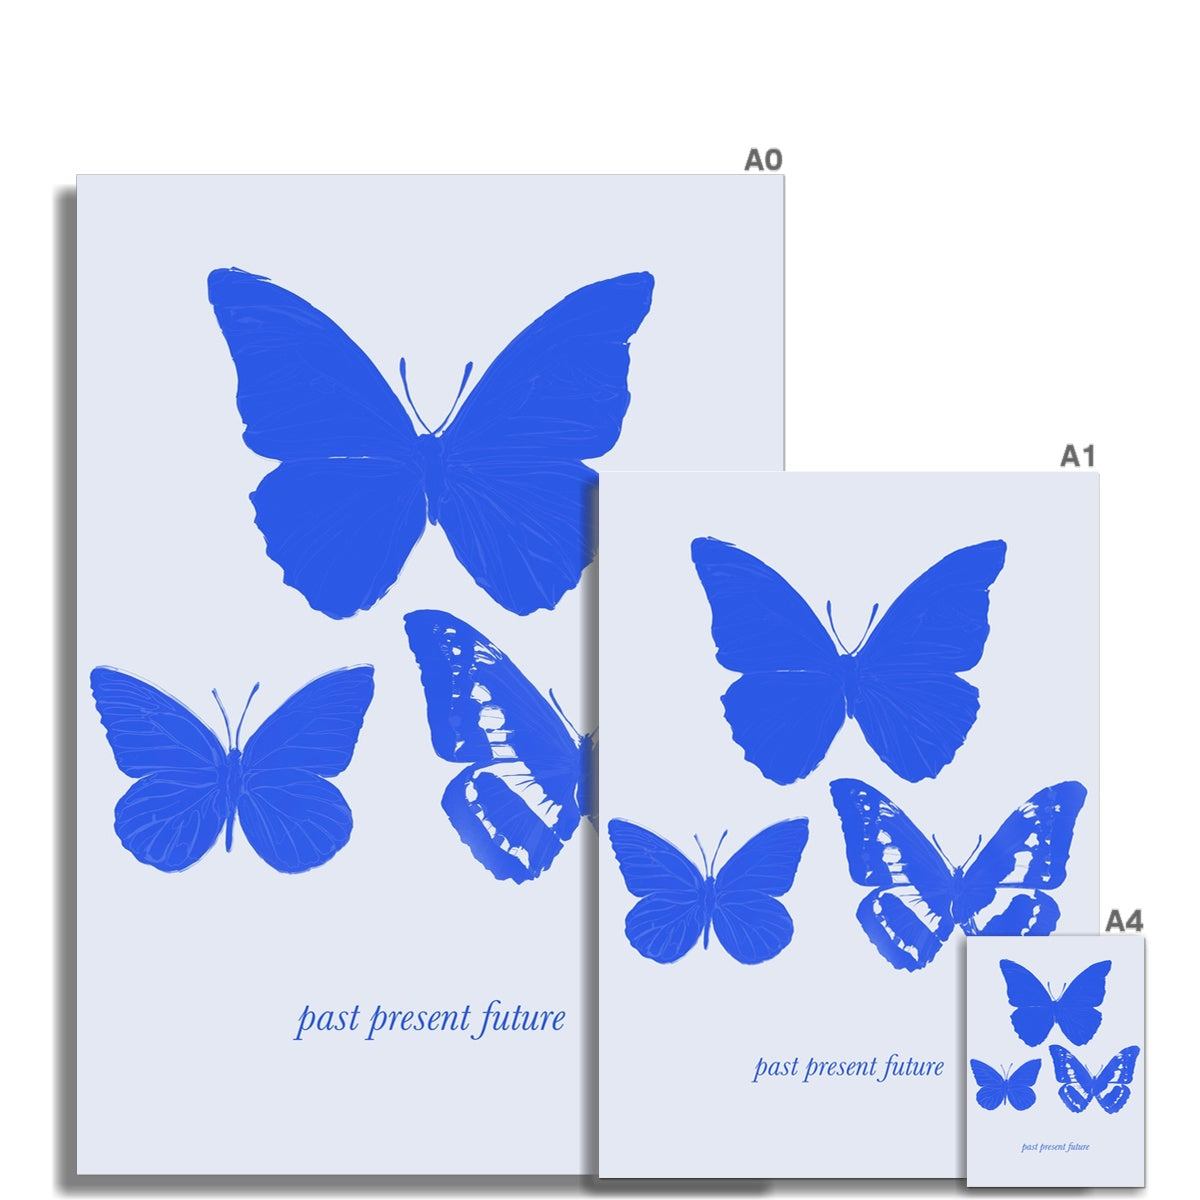 © les muses / The Butterfly Effect collection features butterfly art prints featuring illustrations of three butterflies with "past present future" typography underneath. Dreamy aesthetic posters
perfect for dorm and apartment decor